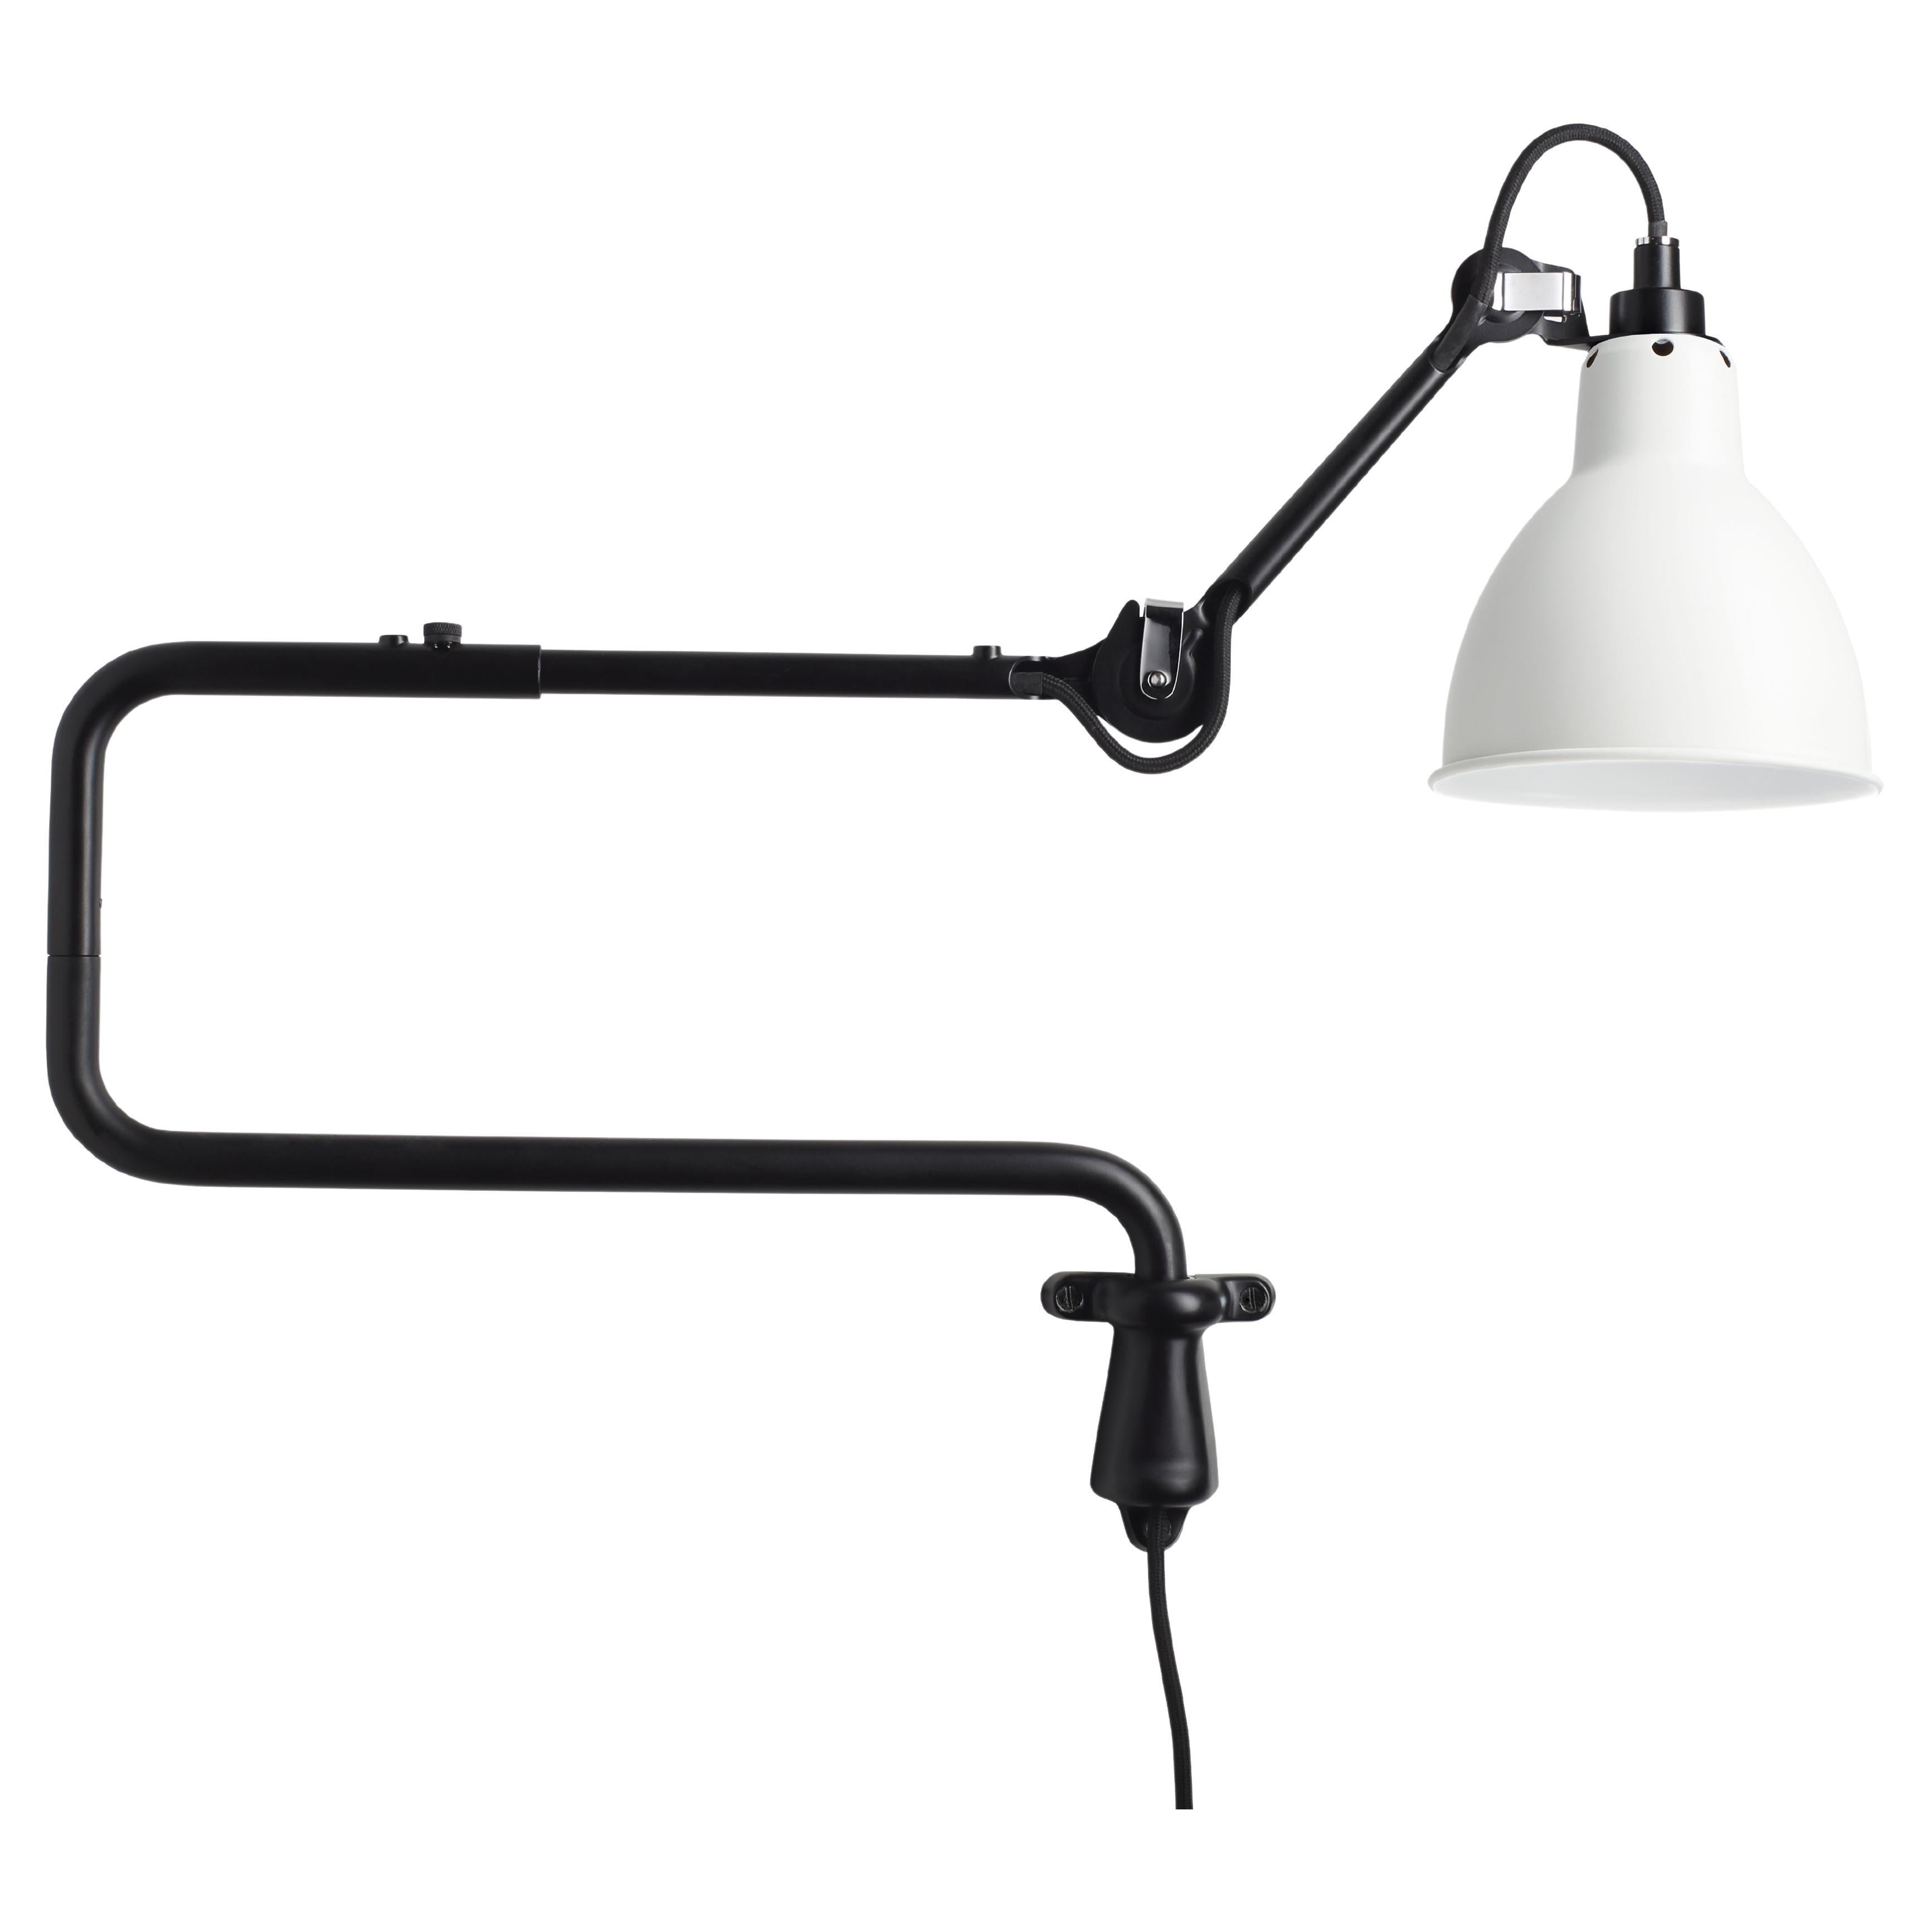 DCW Editions La Lampe Gras N°303 Wall Lamp in Black Arm and White Shade For Sale